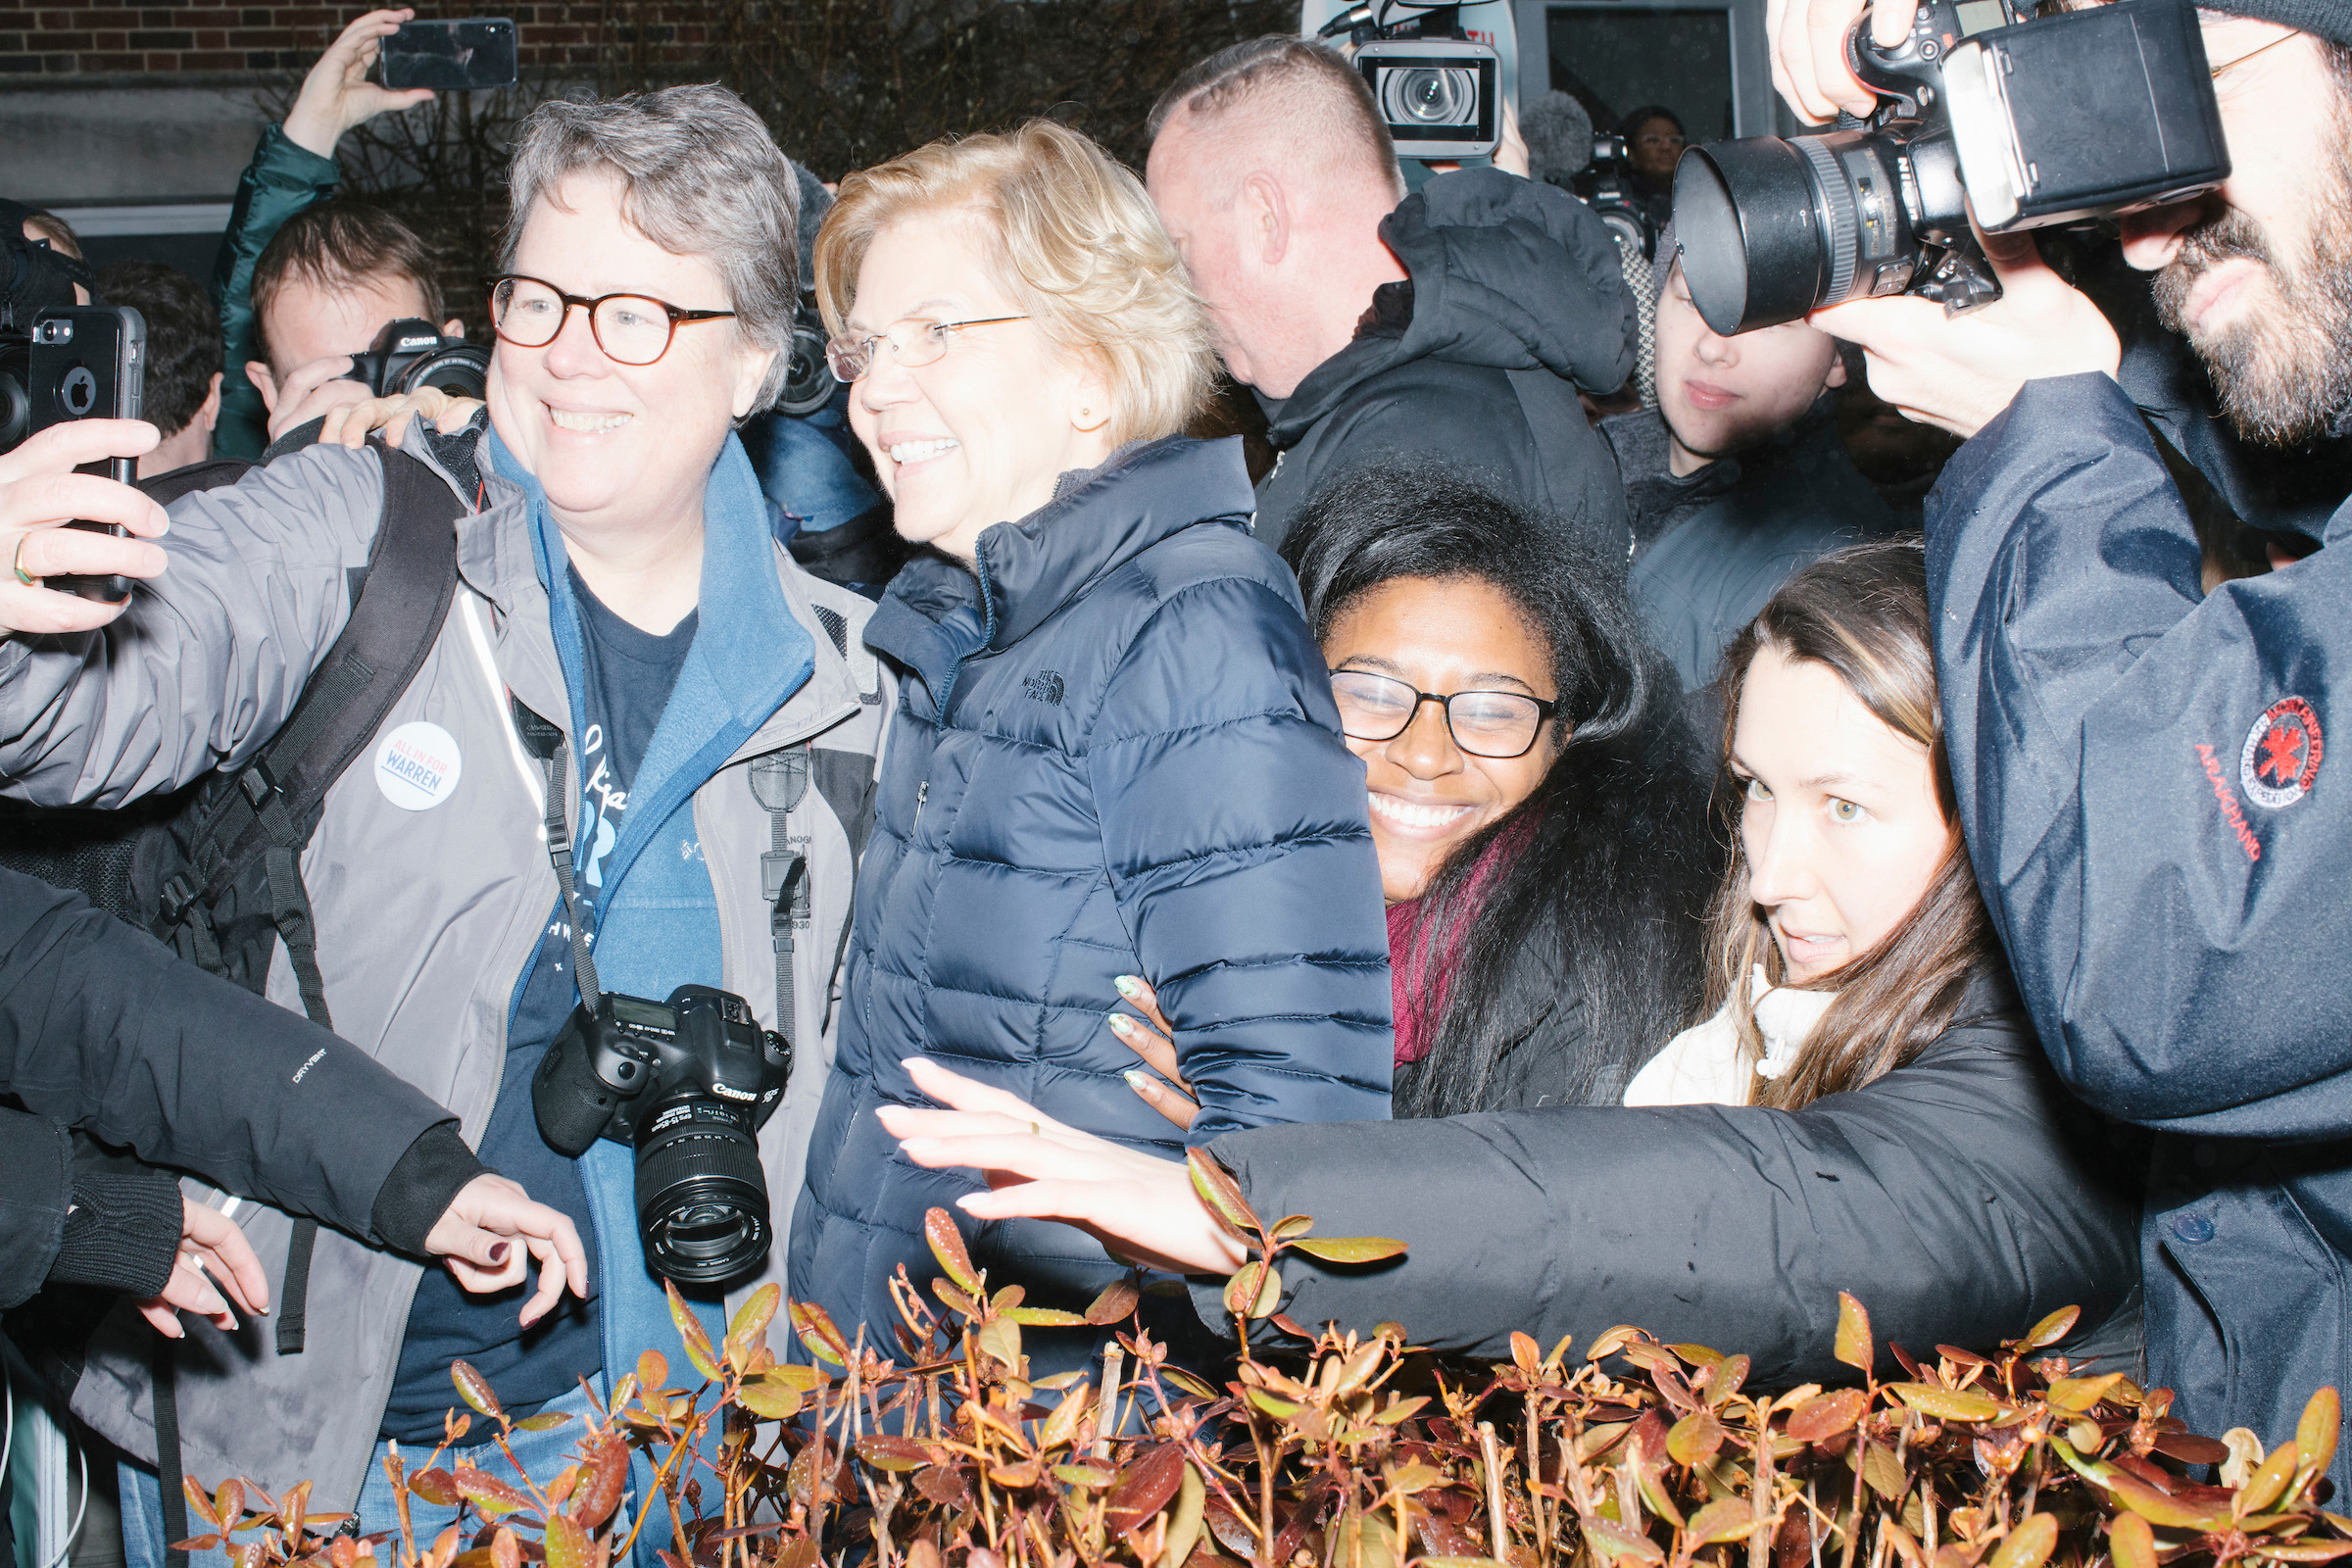 Media surrounds Democratic presidential candidate Sen. Elizabeth Warren as she greets supporters outside a polling place at Webster Elementary School in Manchester, N.H., on Feb. 11, 2020. (M. Scott Brauer for TIME)